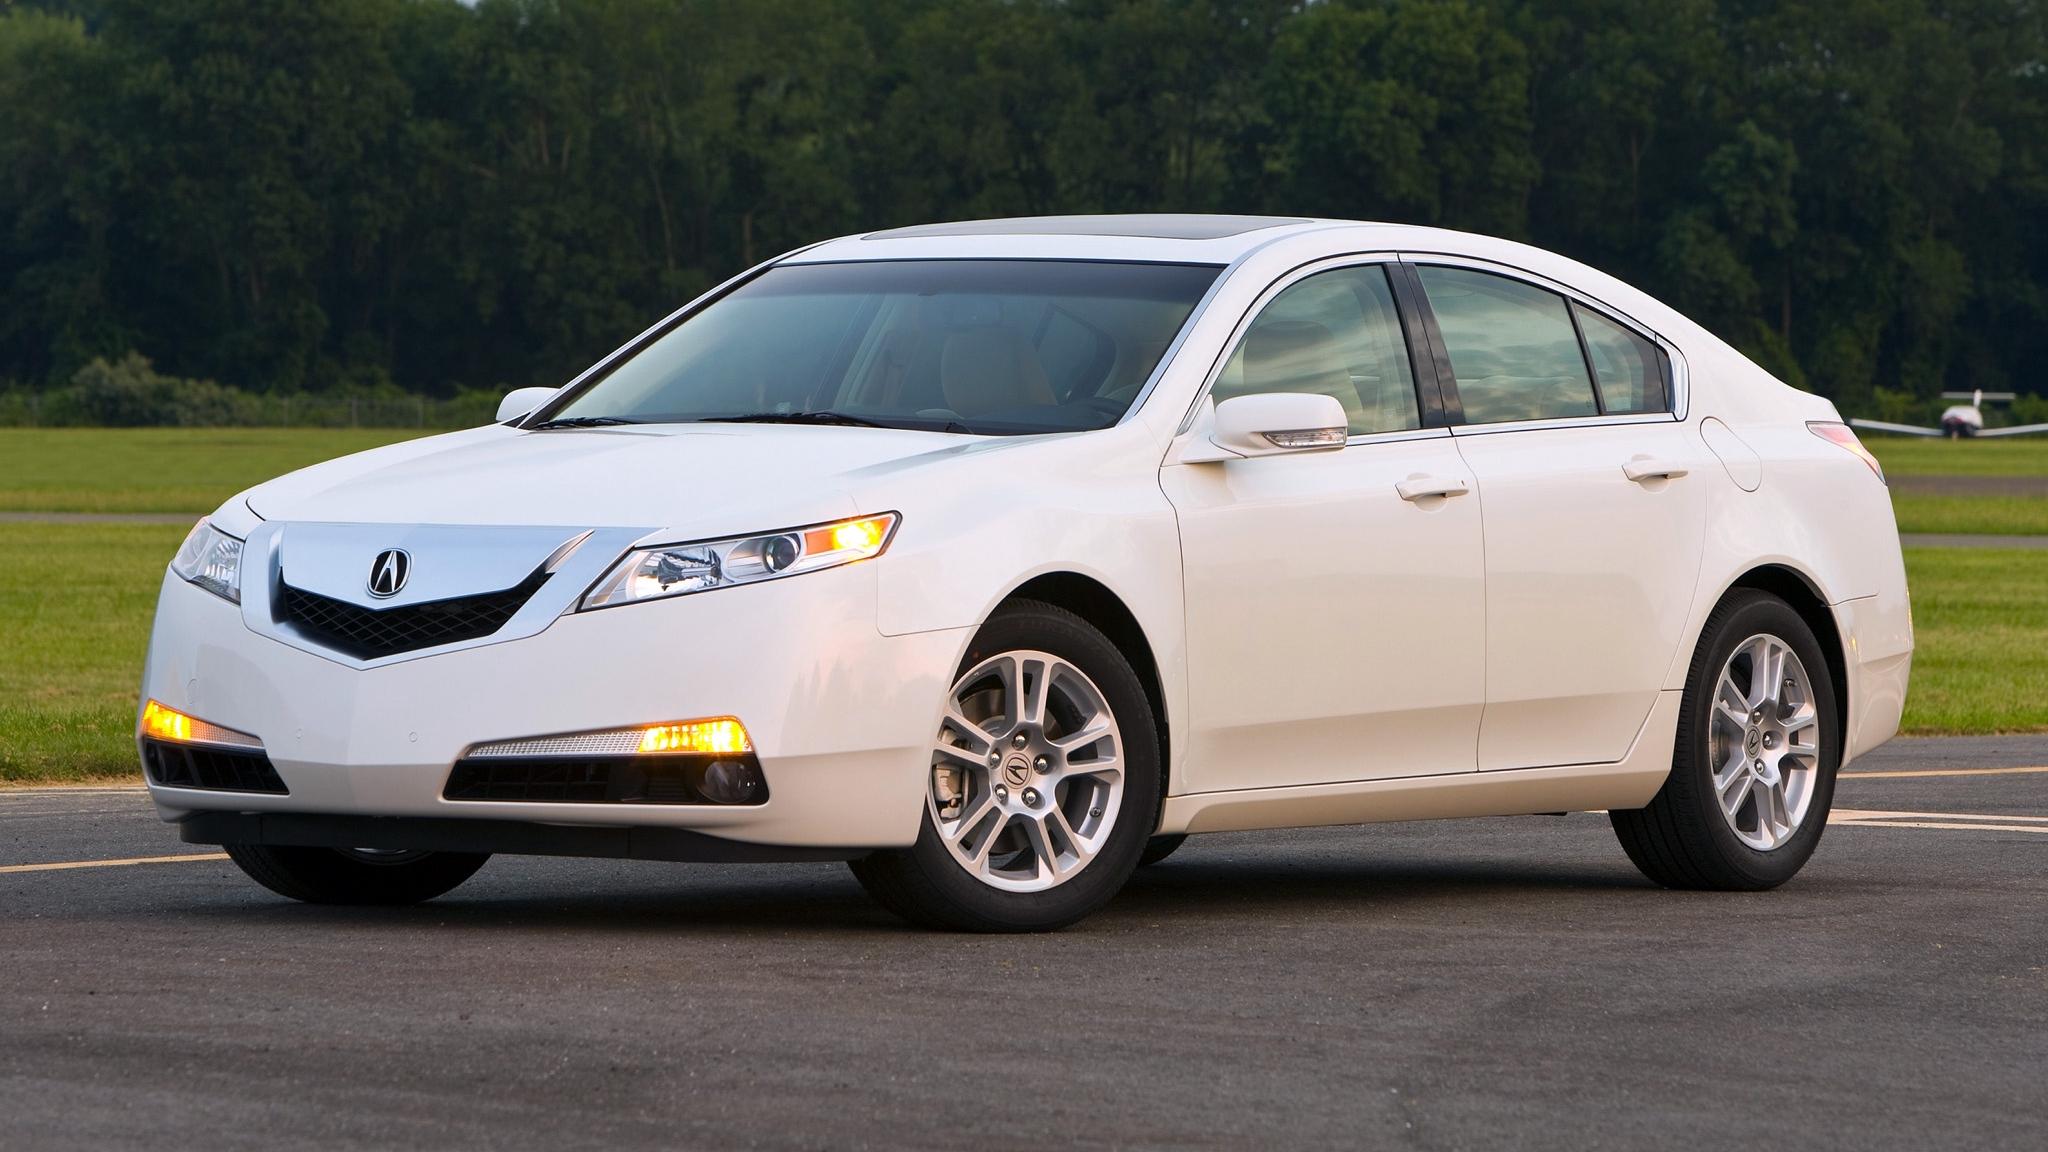 Download wallpaper 2048x1152 acura, tl, white, side view